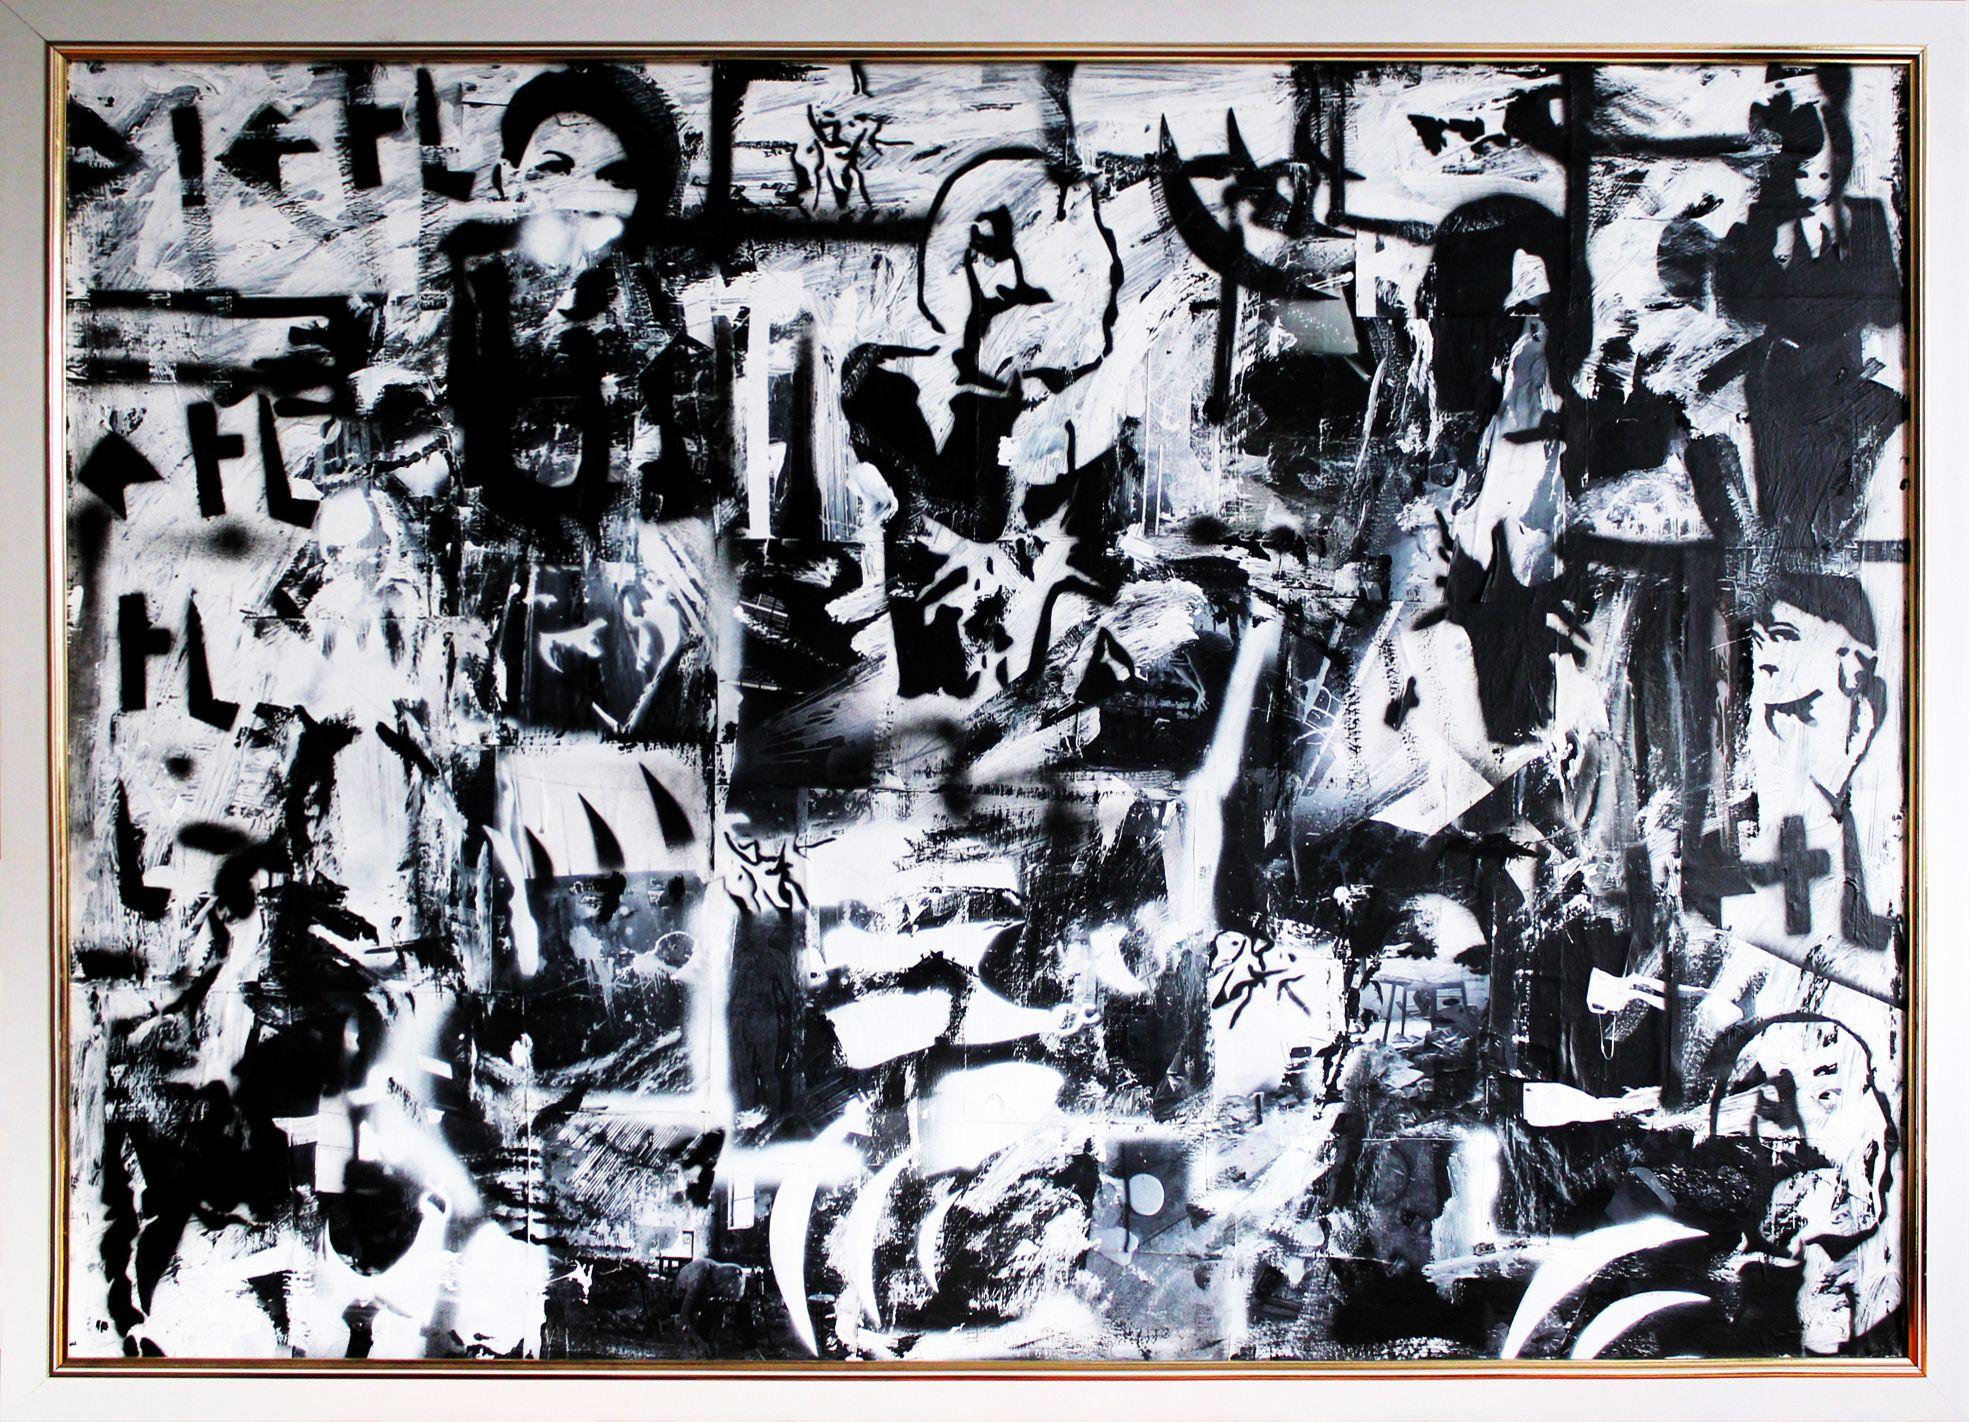 Pamela Rys Abstract Painting - Black & White, Painting, Acrylic on Canvas